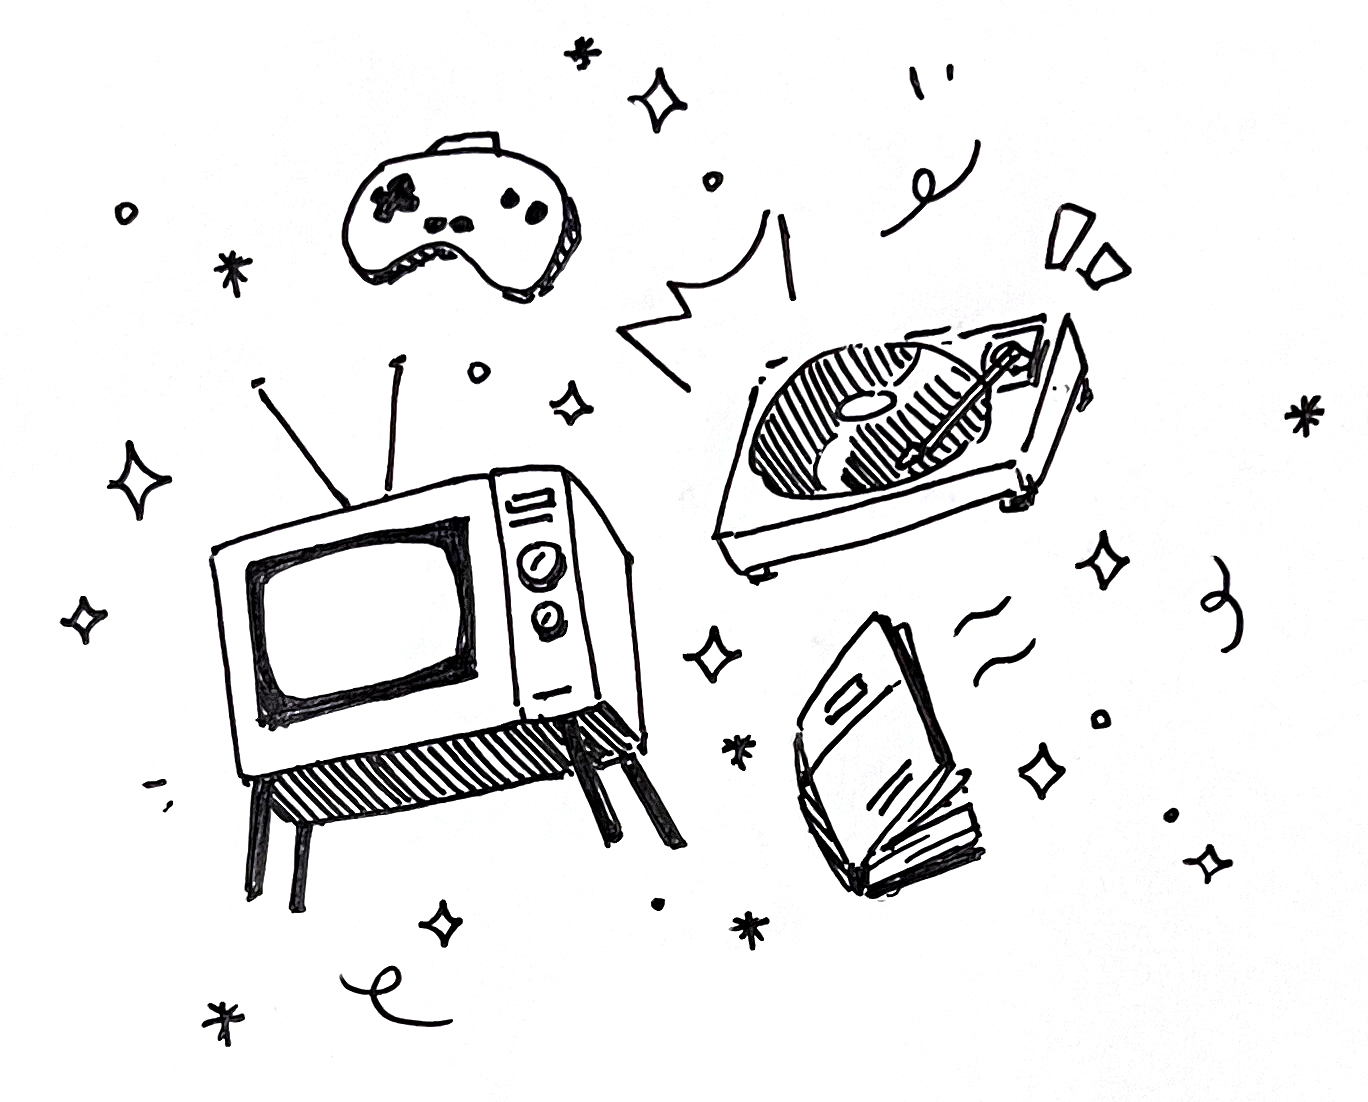 Doodles of a retro tv set, record player, game controller, and book, and decorated with sparkles.